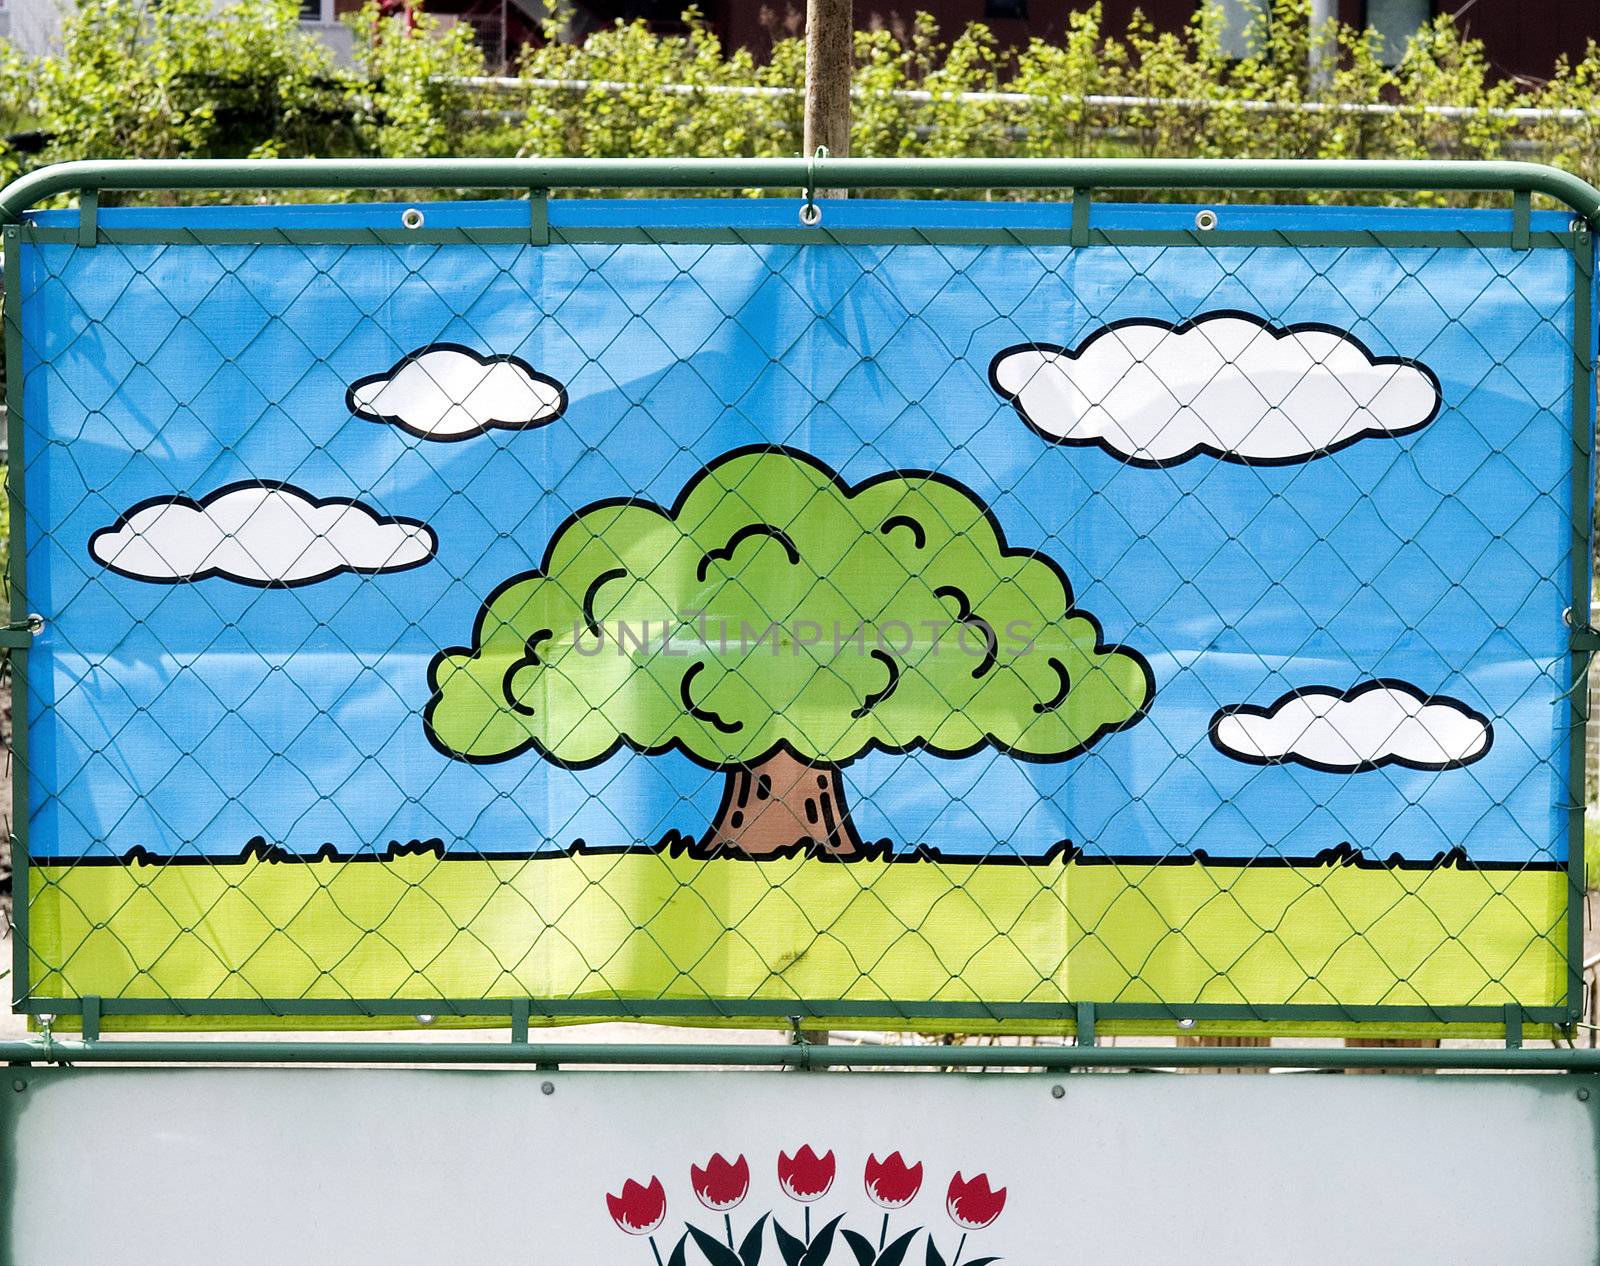 decorative cartoon image on building site fence in tokyo japan by jackmalipan